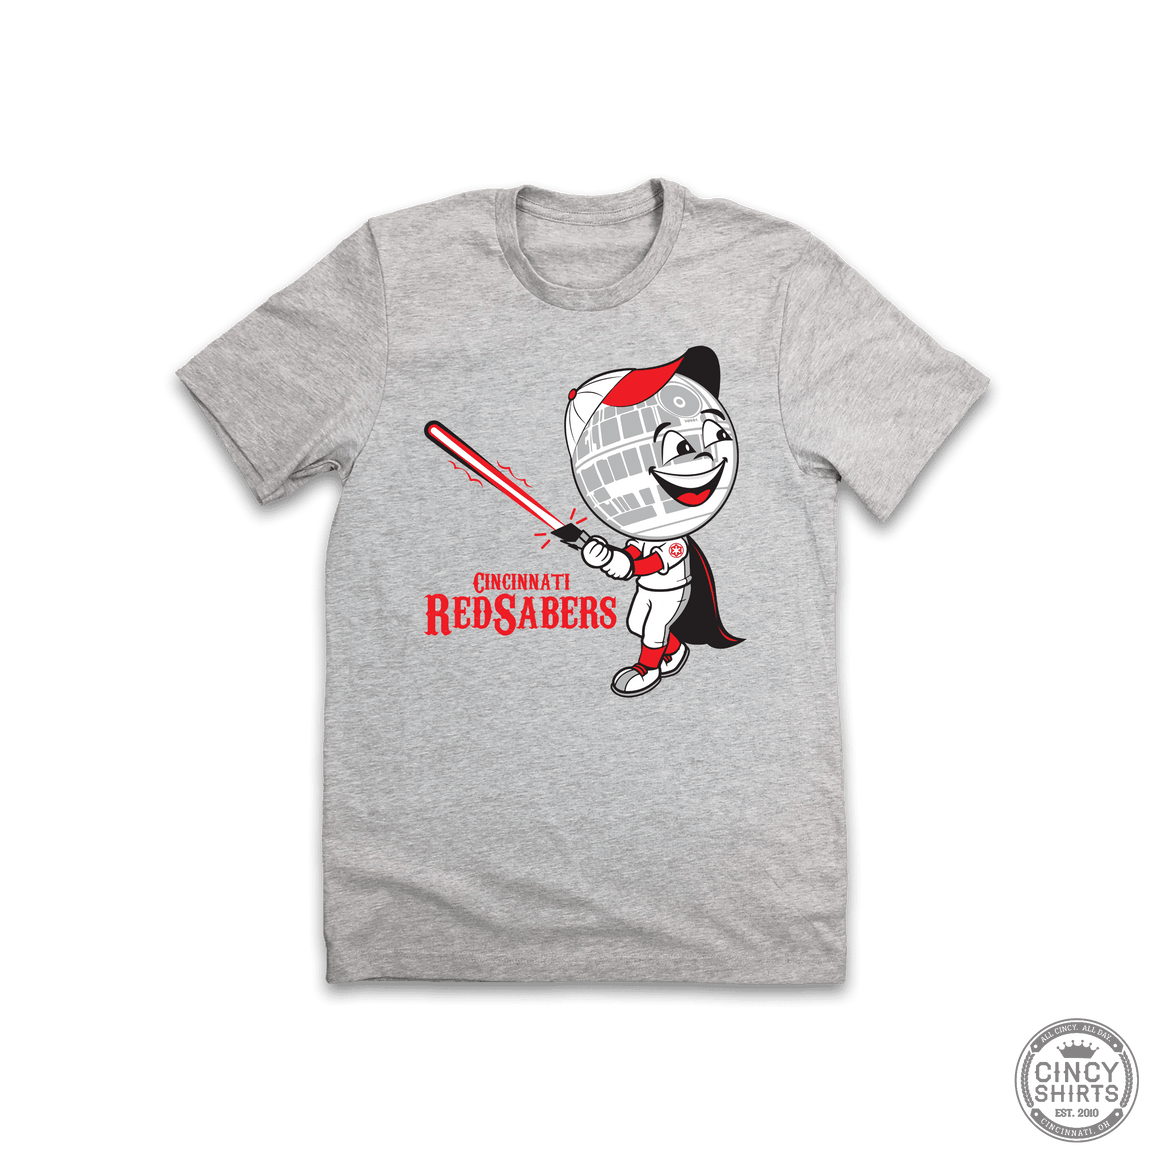 Kids - Youth Apparel, Toddler, Infant Onesies, Cincy Shirts